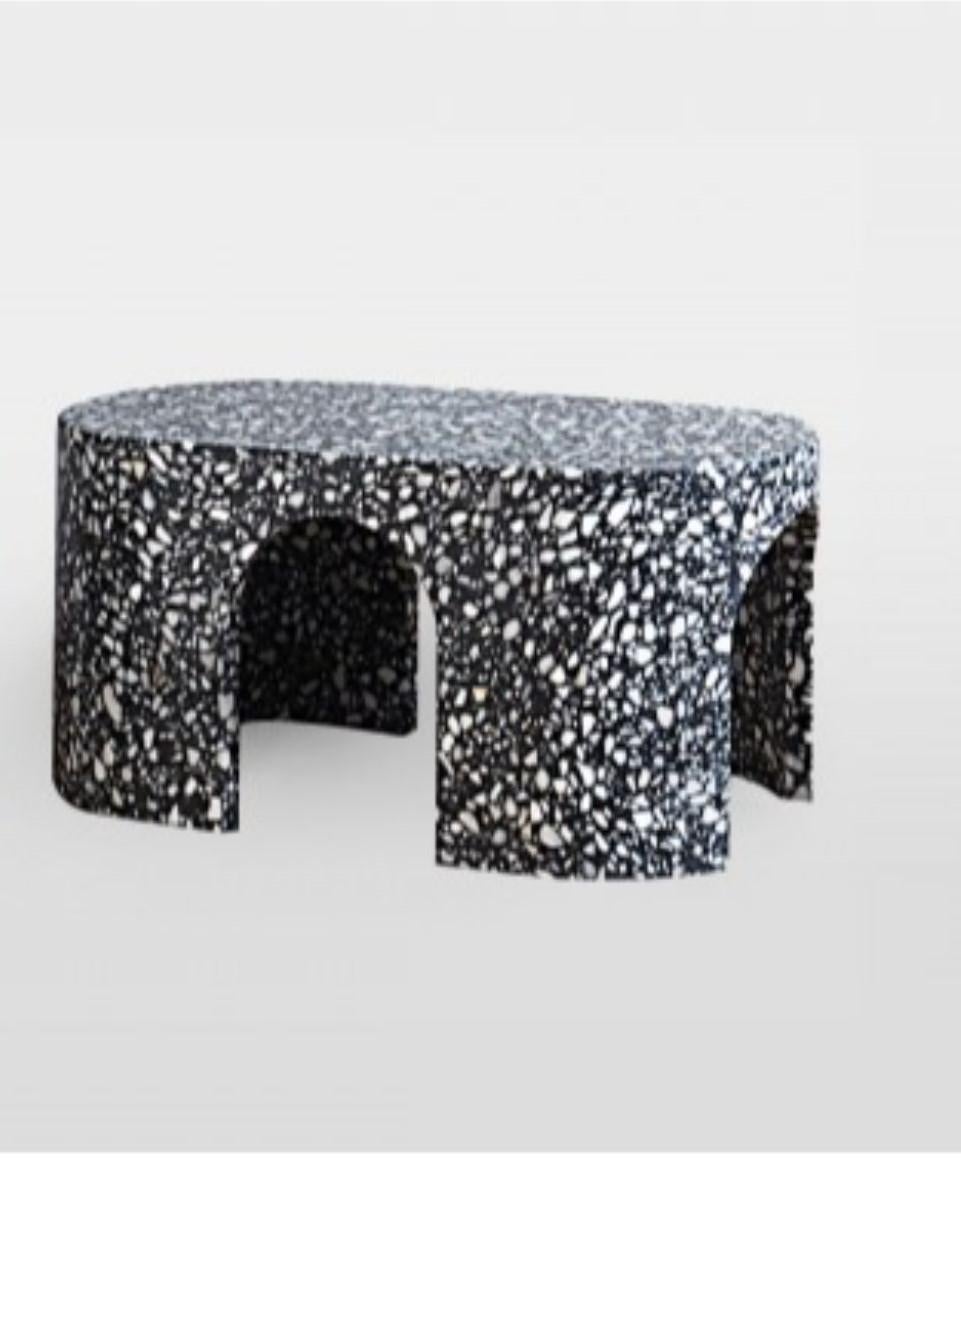 Loggia Terrazzo Coffee Table by Matteo Leorato
Dimensions: D 80 x W 40 x H 37 cm
Materials: Terrazzo (Marble and Resin). 
Also available in White. Please contact us for more information. 


An essential element with a strong stylistic impact